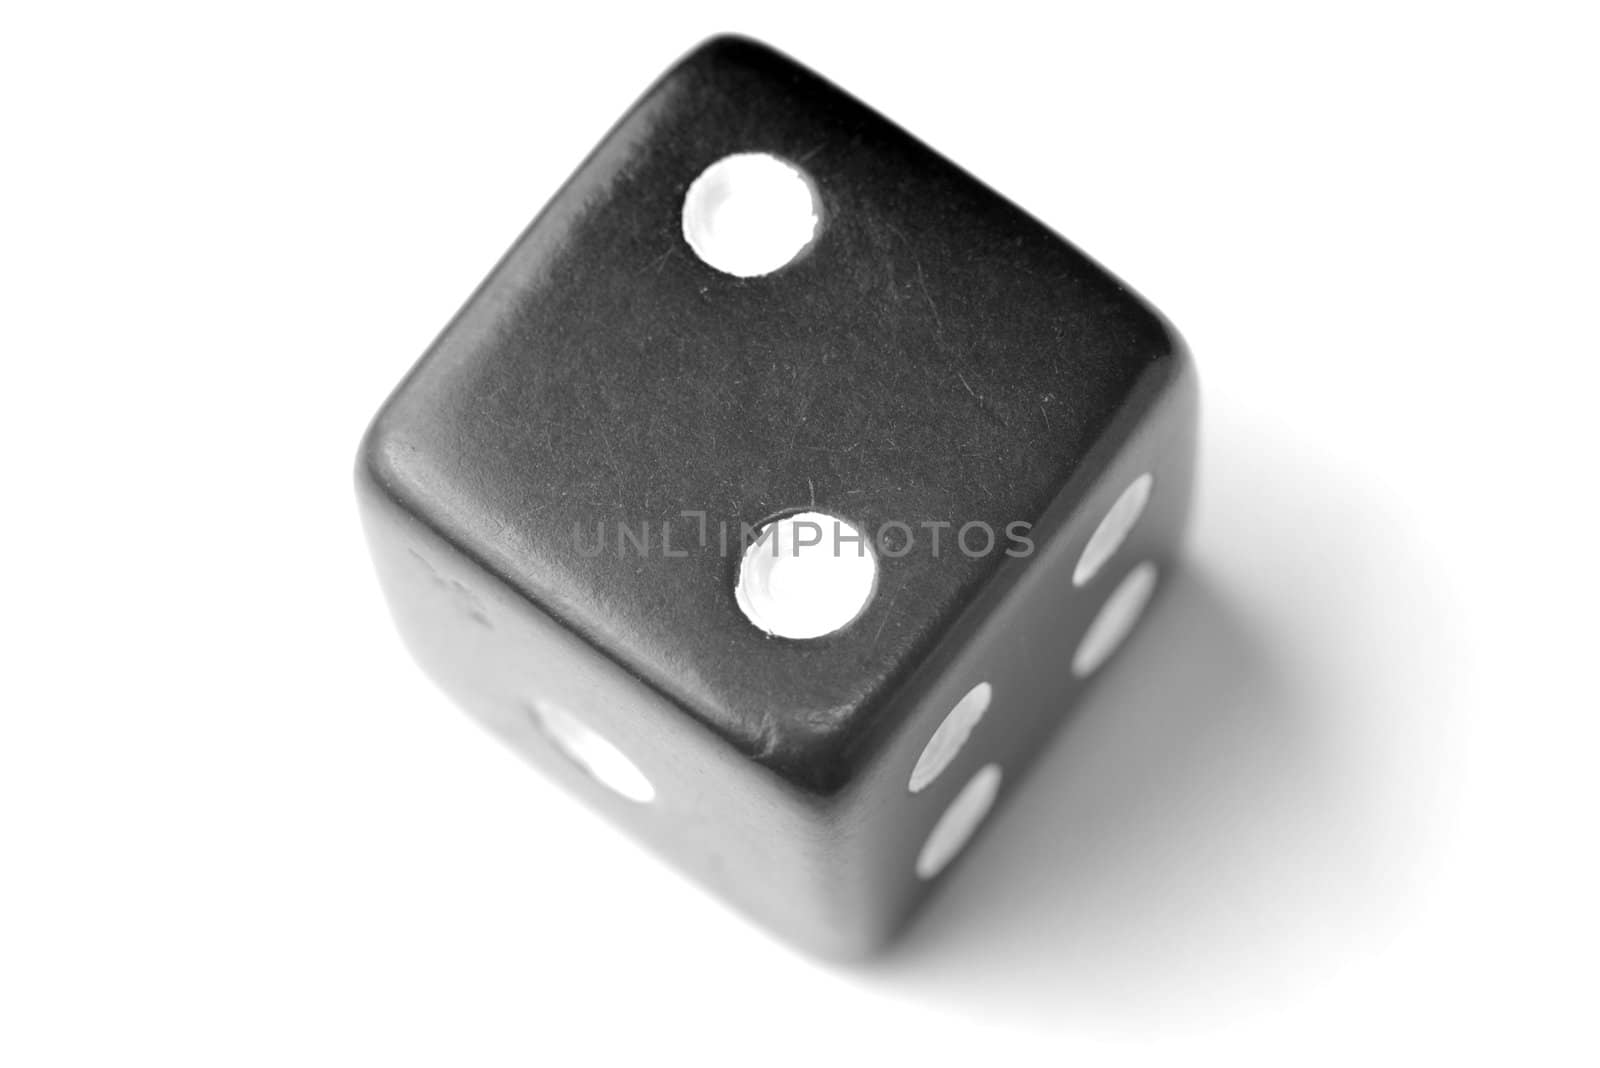 Black Die on White - Two at top. Similar images of 1-6 exists